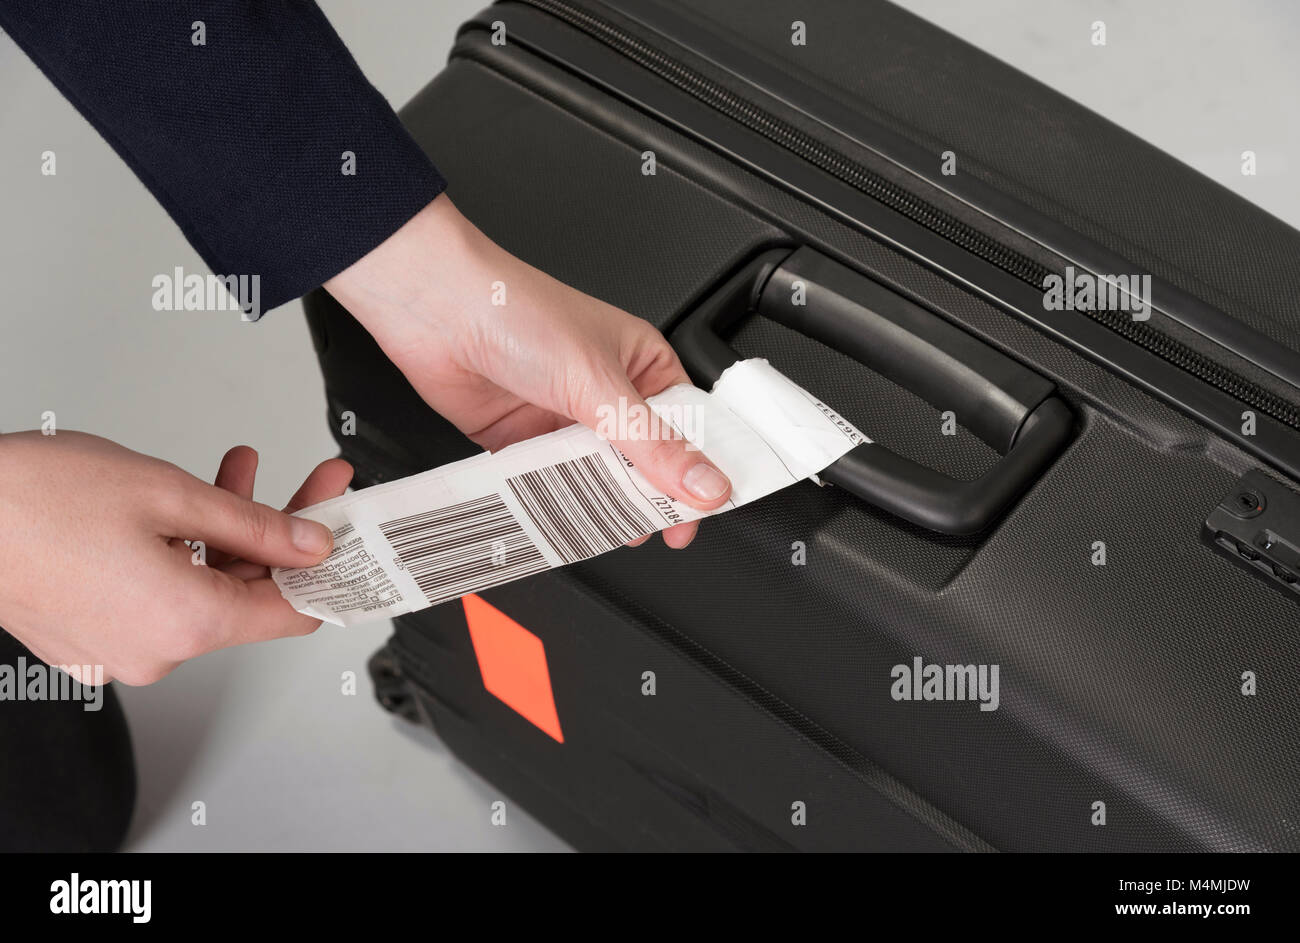 Airline luggage security tag being attached to a travellers black suitcase Stock Photo